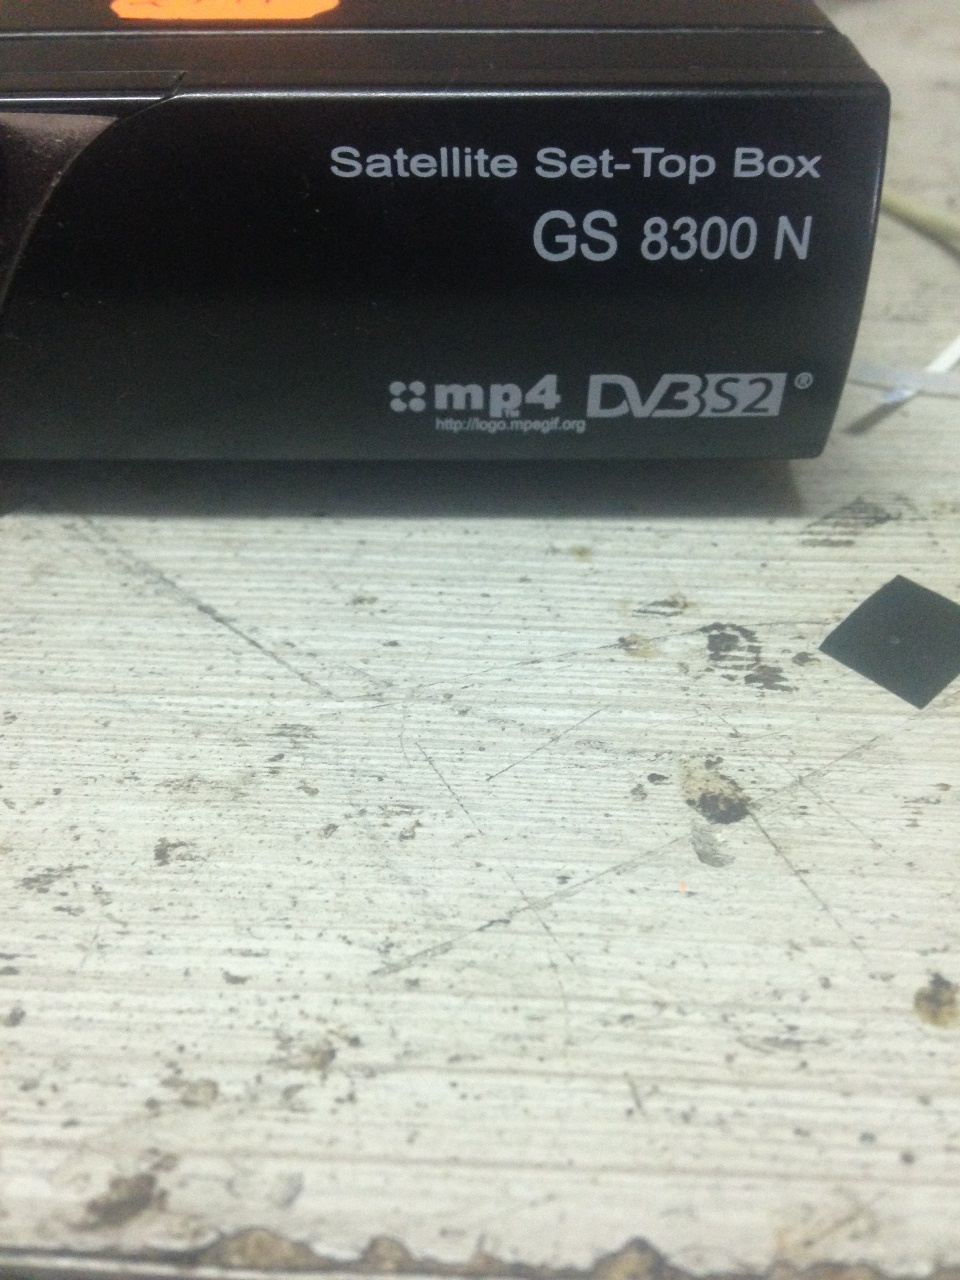 resiver_gs_8300_n_1